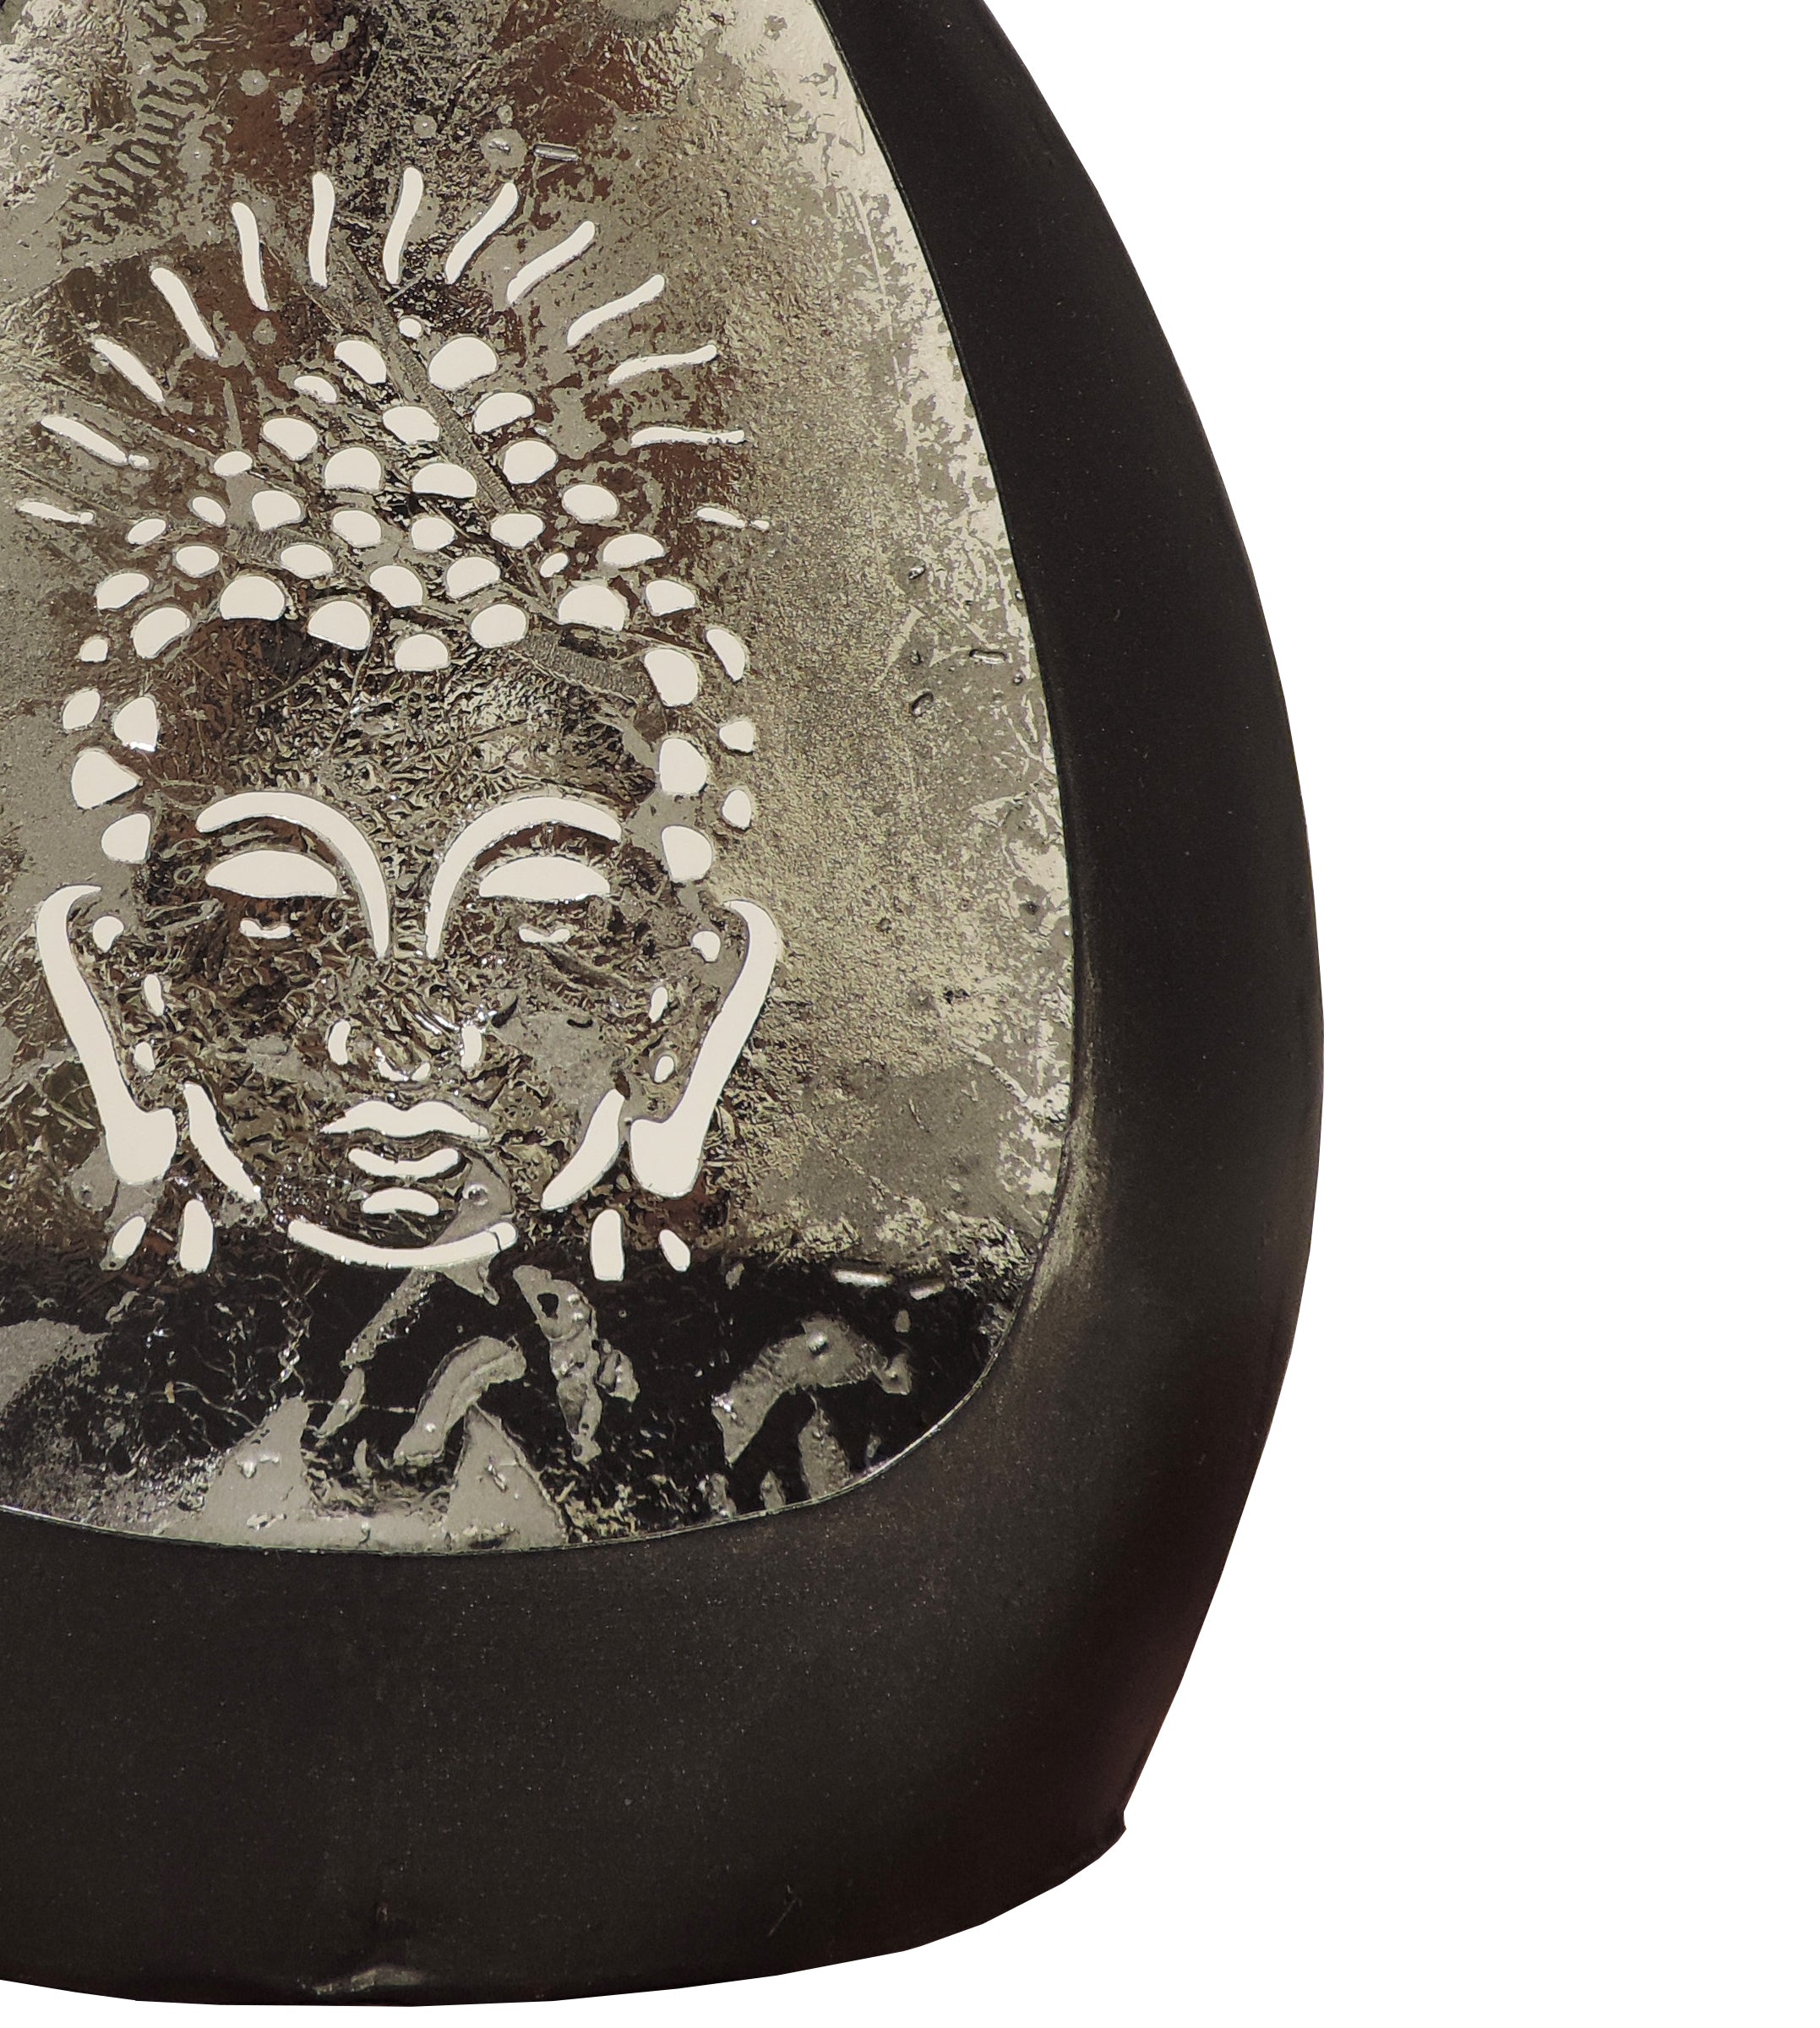 Chiragh Collection - Buddha Set of 2 Votives with tea light - Black & Silver